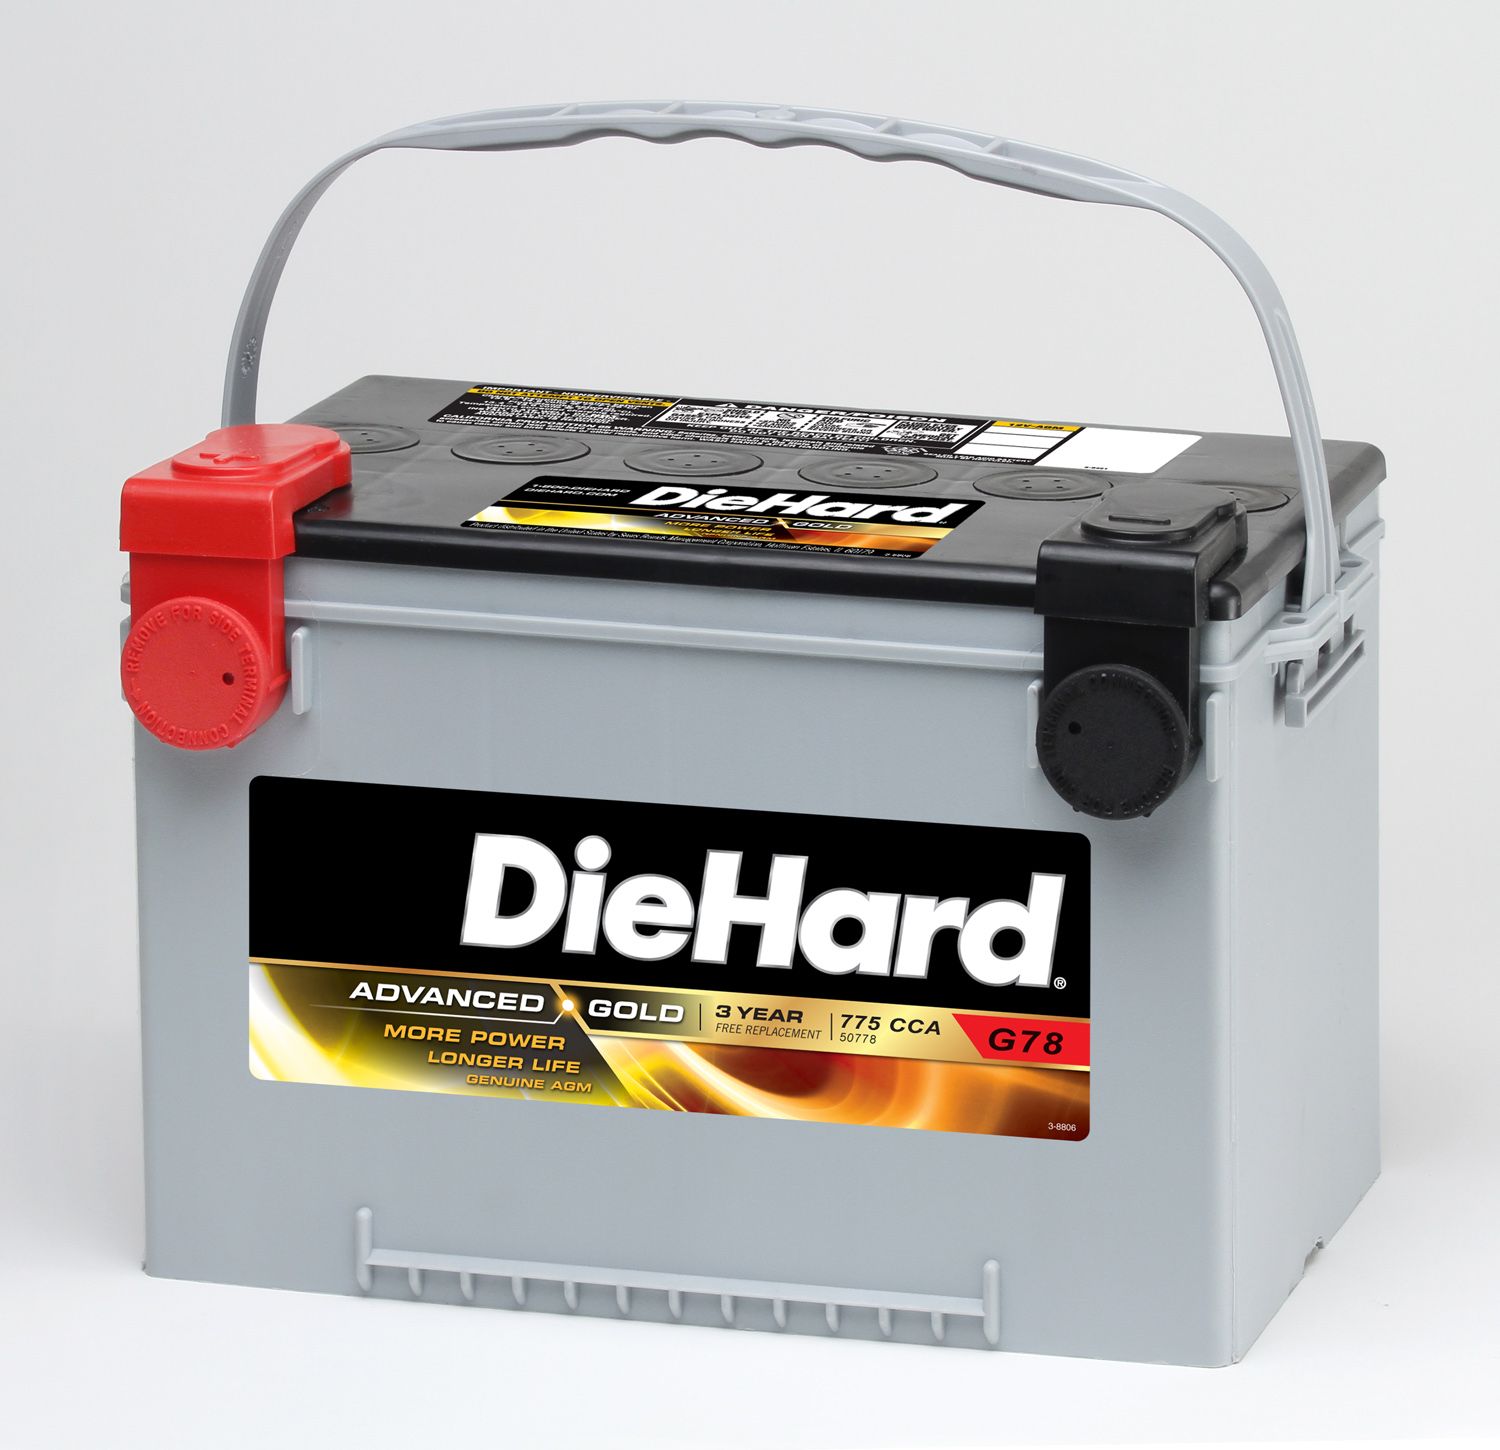 DieHard Gold AGM Automotive Battery - Group Size EP-78 (Price with Exchange)